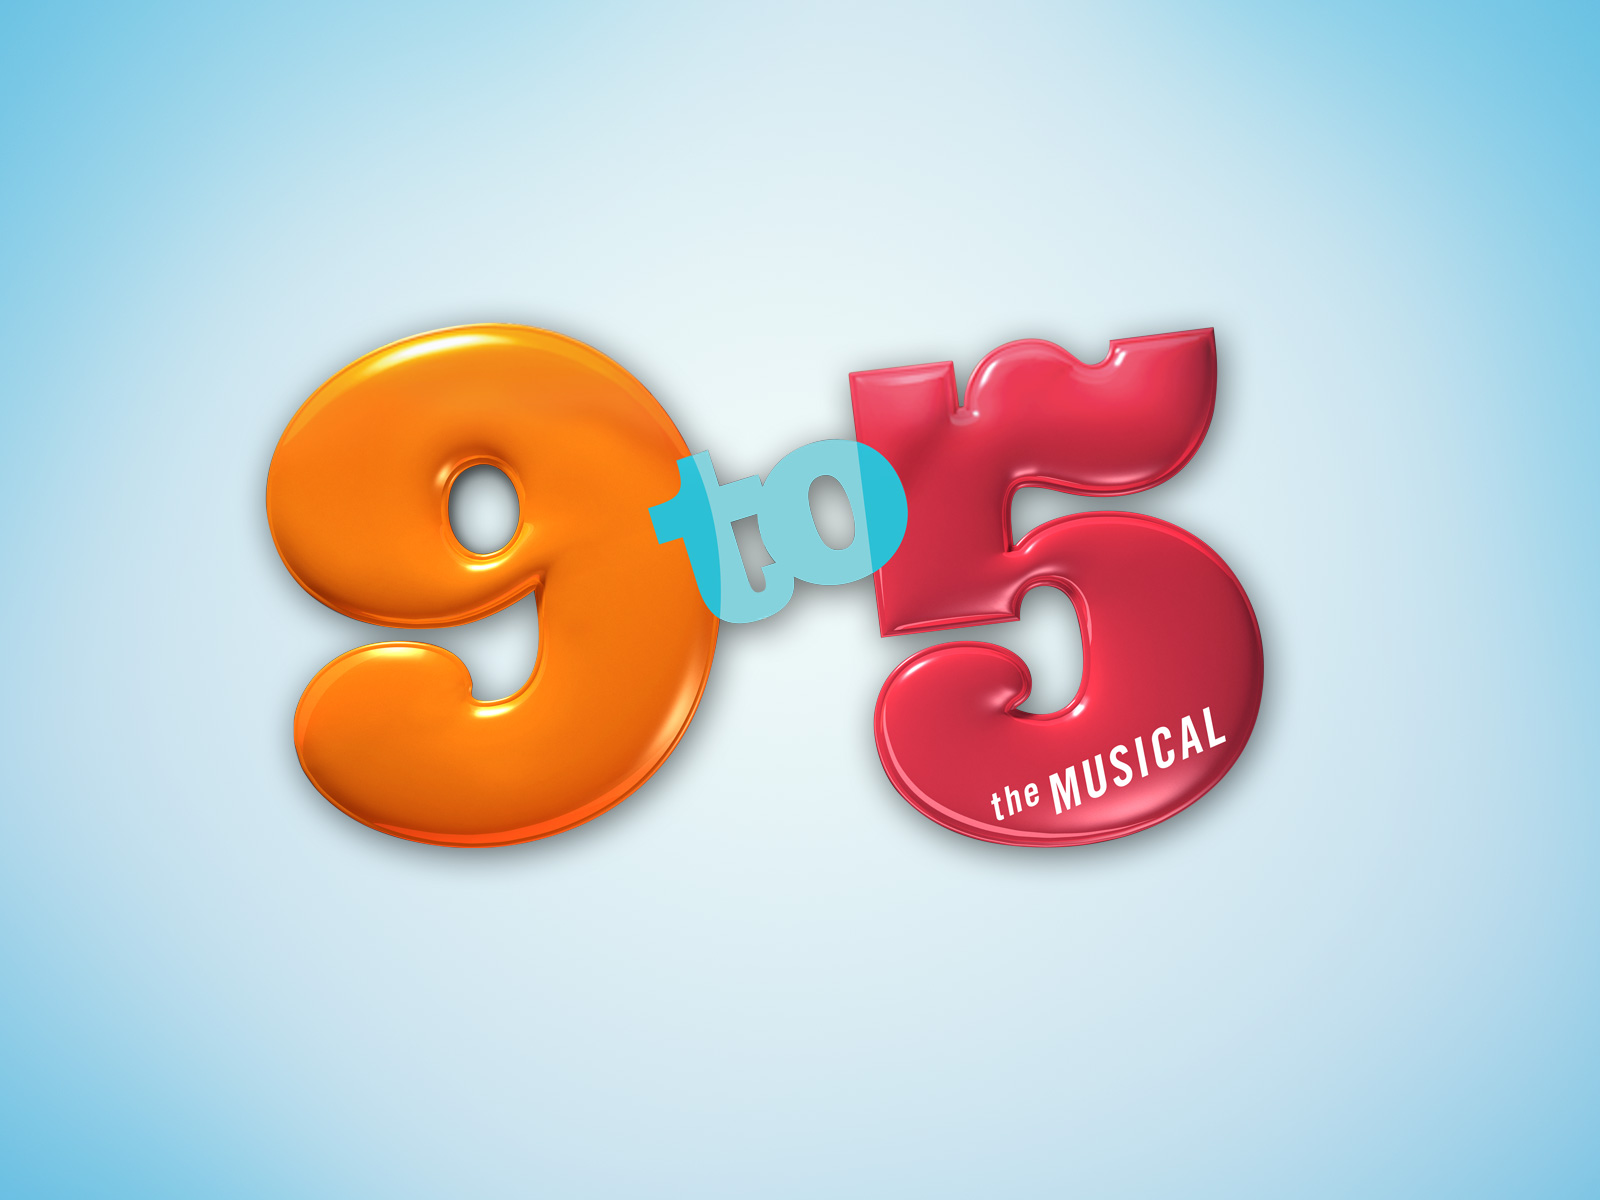 9 To - 9 To 5 Musical Logo - HD Wallpaper 